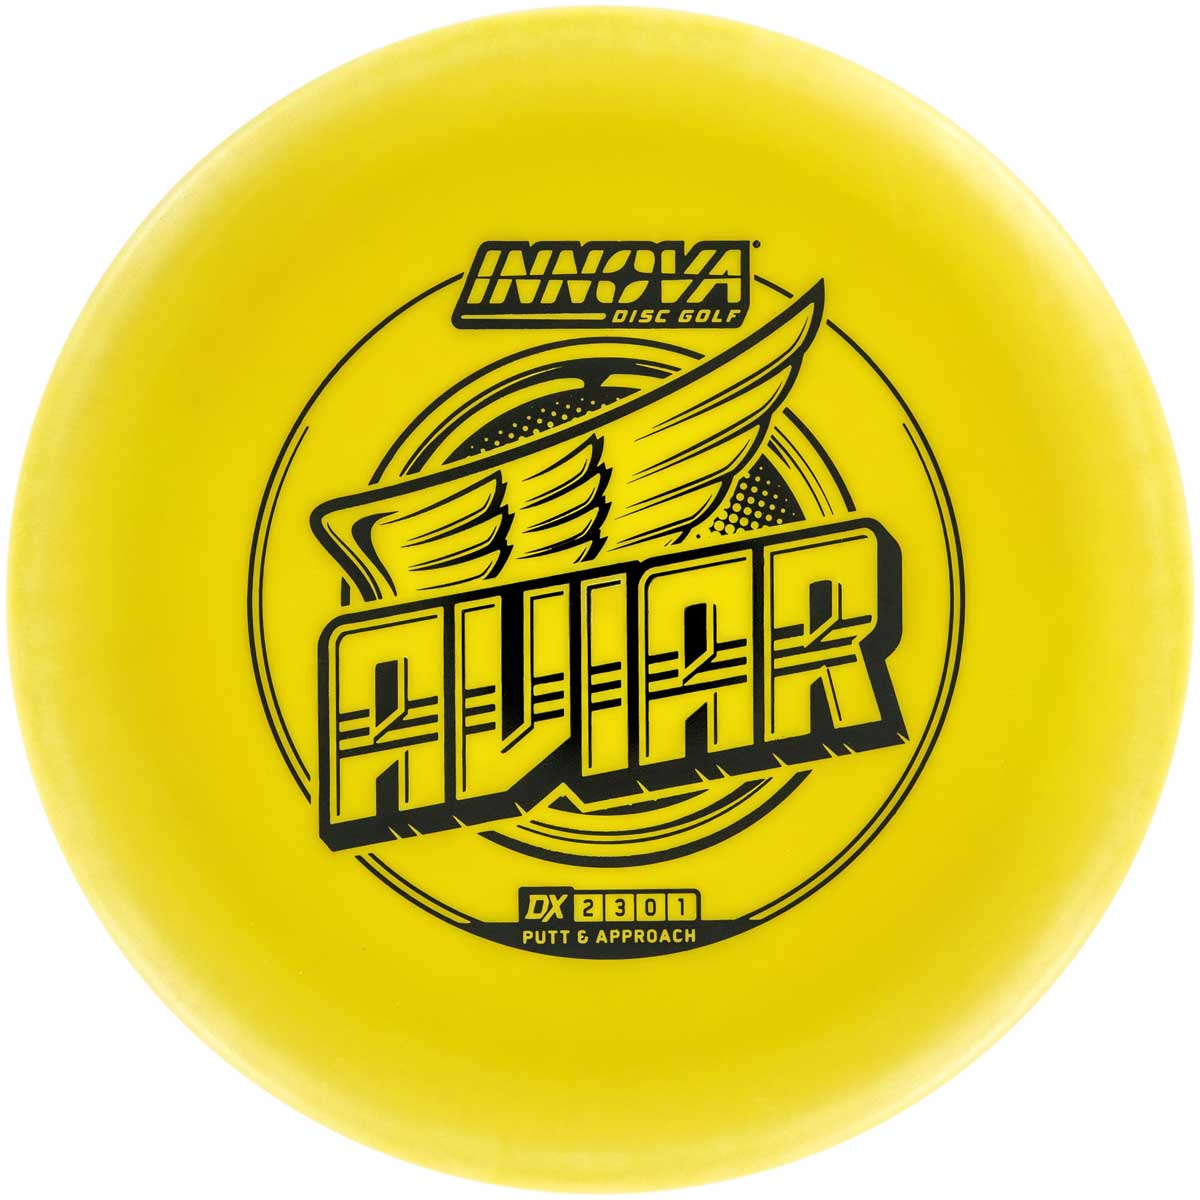 DX Aviar Putt and Approach disc. Yellow color